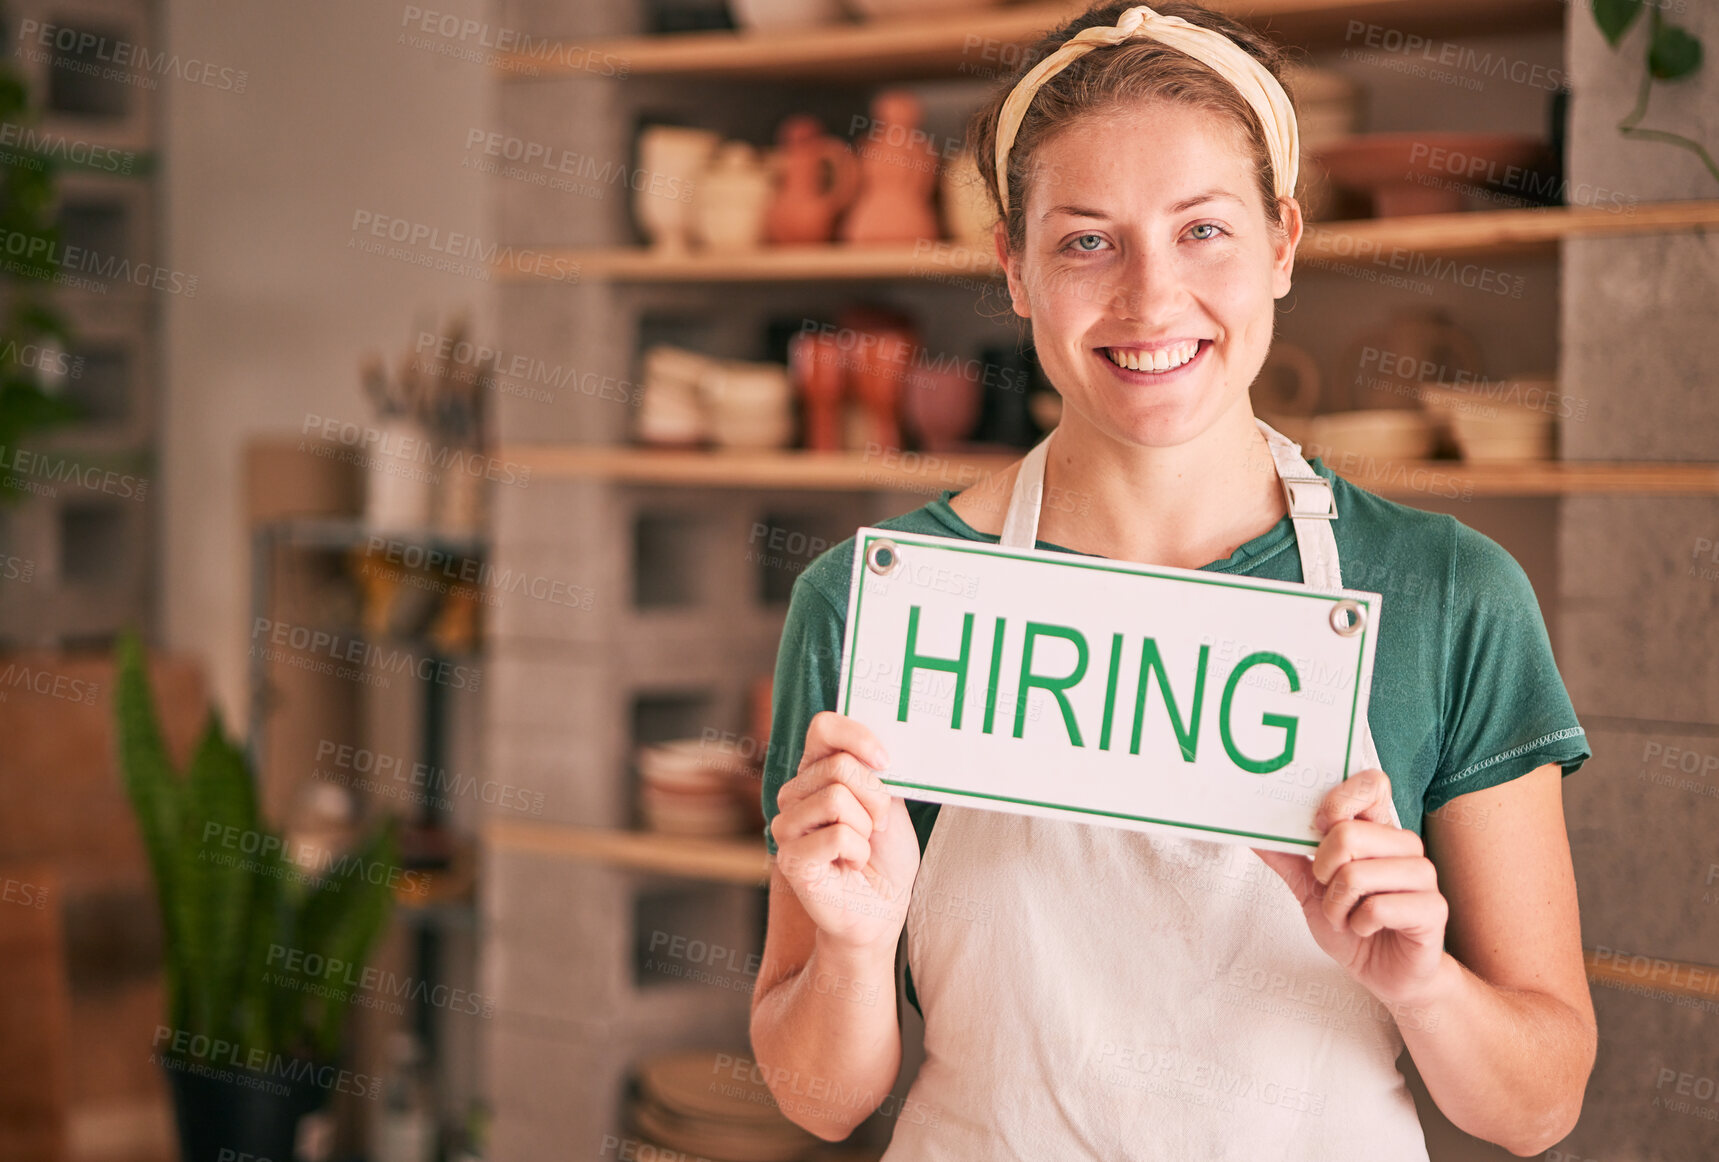 Buy stock photo Hiring sign, portrait and woman business startup in shop recruitment, job advertising and retail experience. Boss, person or employer hand holding a message, banner or board for creative opportunity